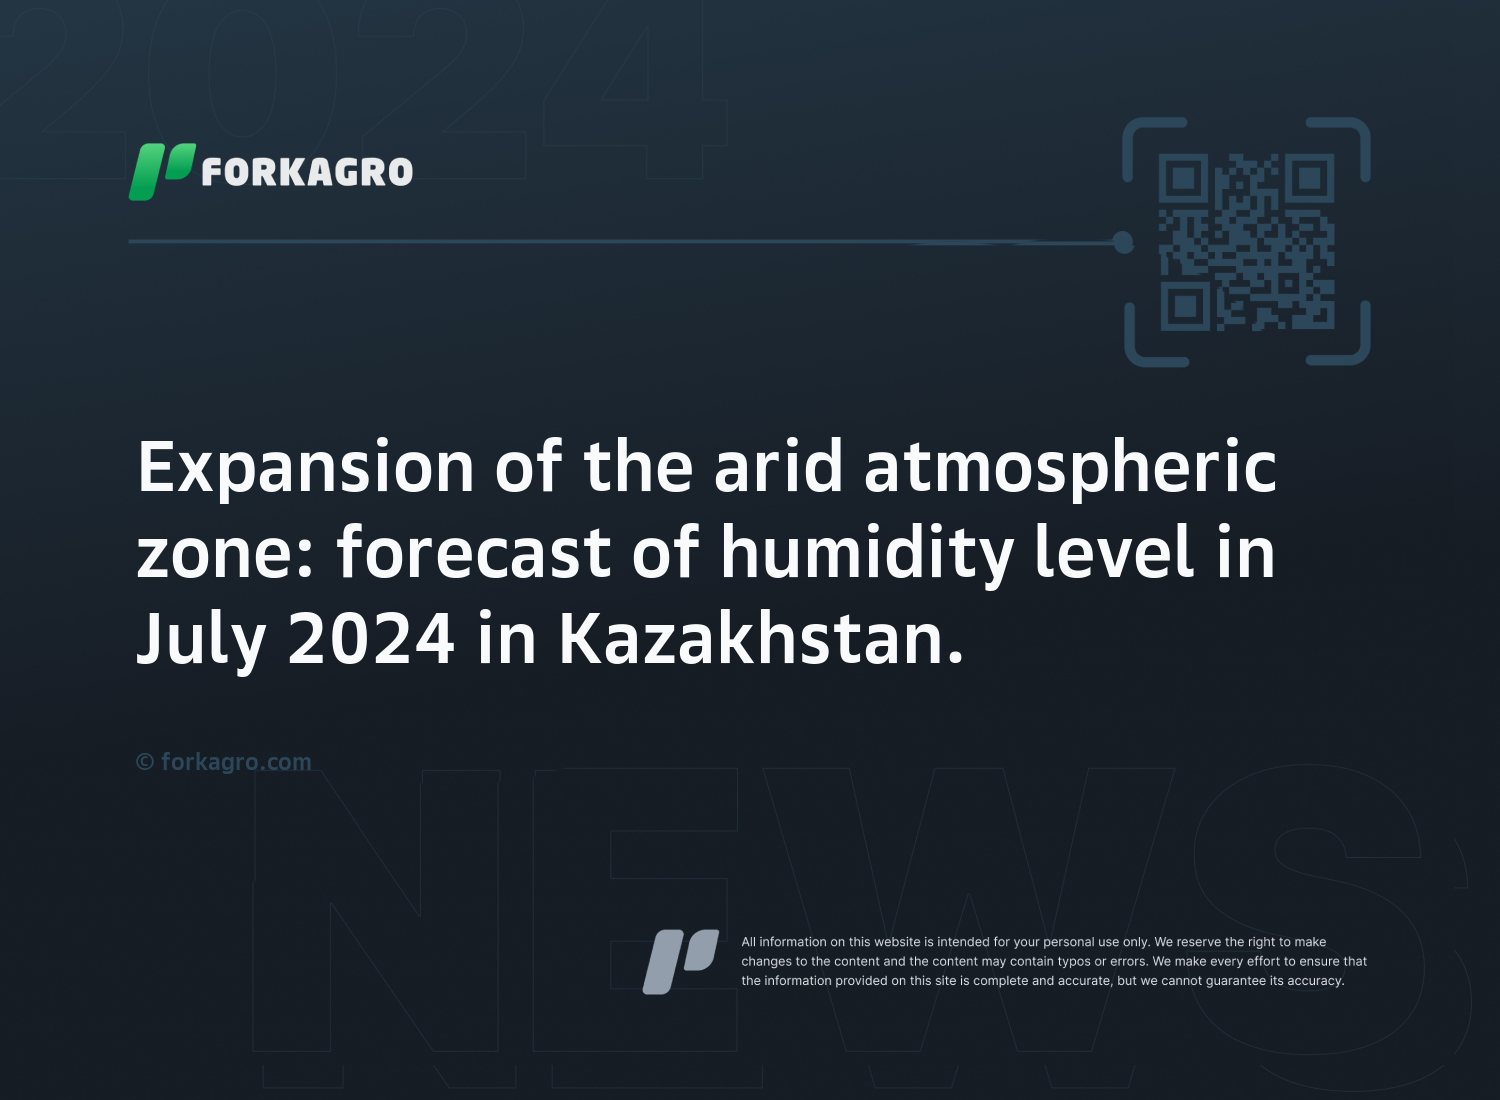 Expansion of the arid atmospheric zone: forecast of humidity level in July 2024 in Kazakhstan.